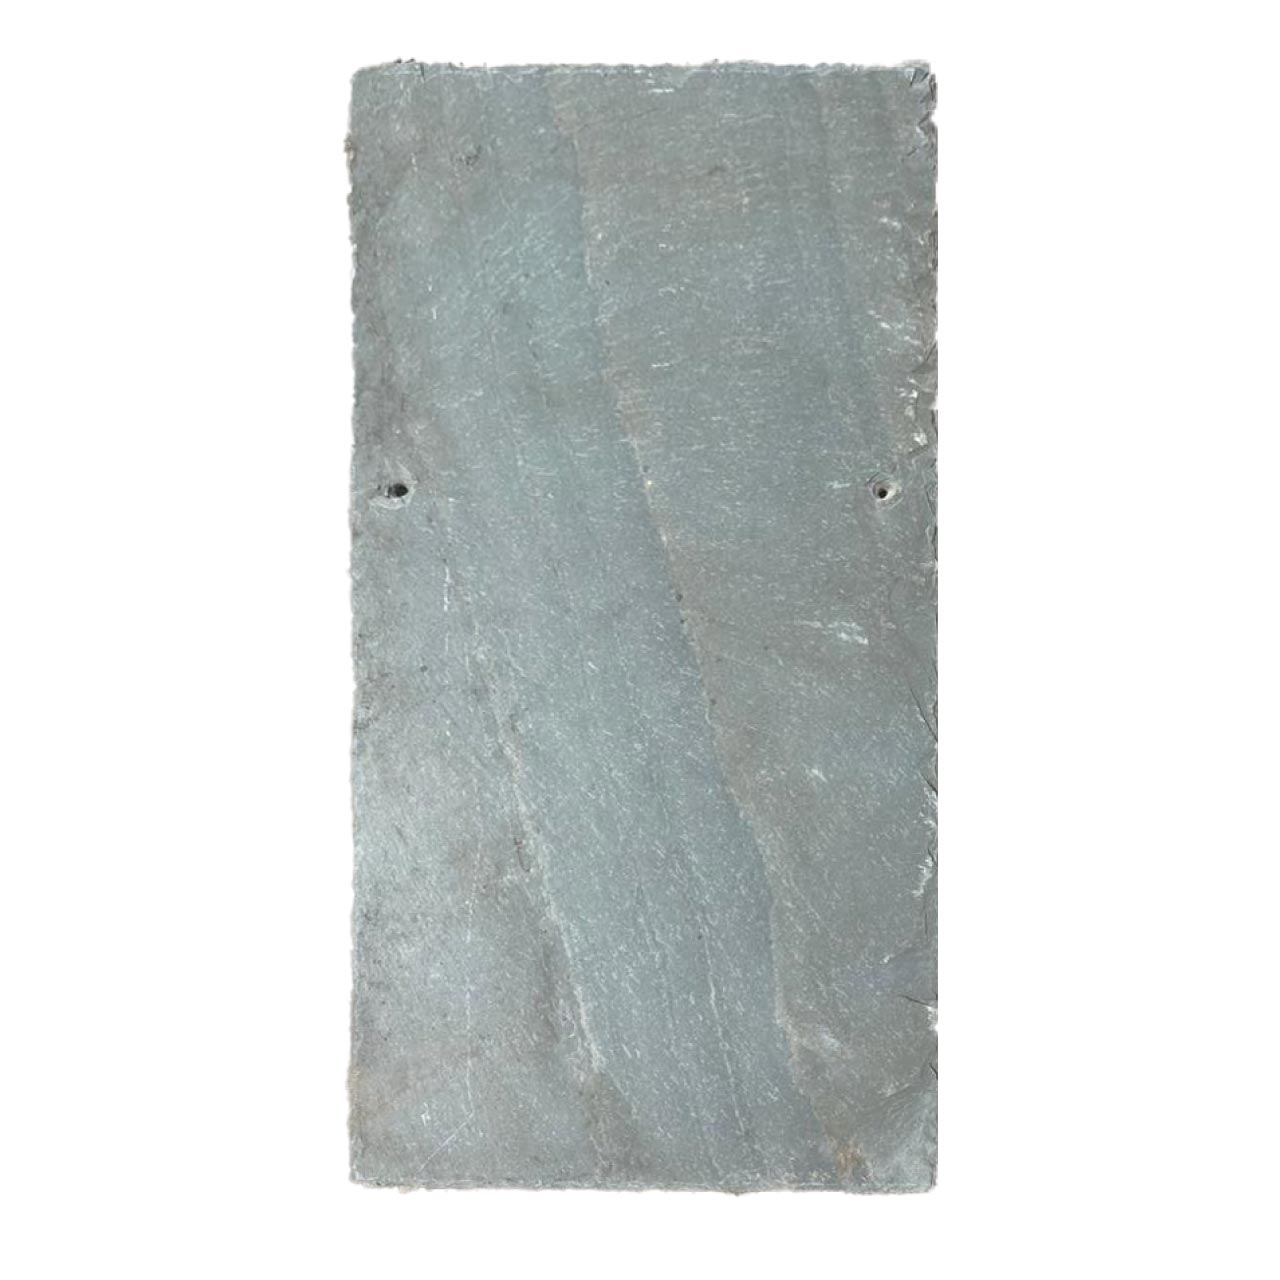 Clearance Slate at Roofing Slate Direct